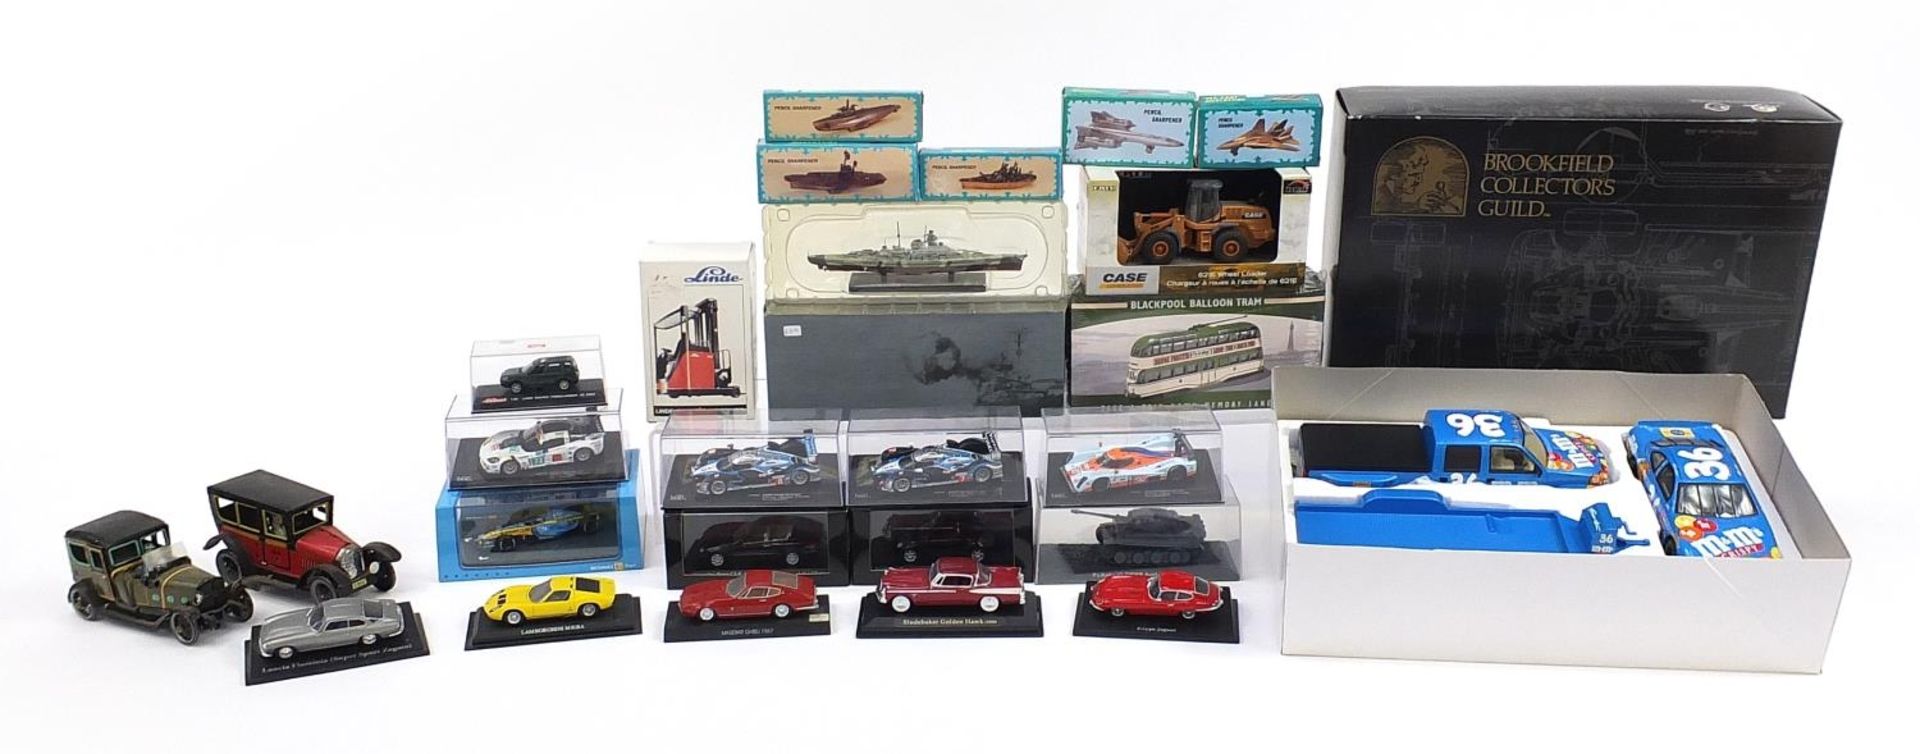 Collectable model vehicles, some diecast with boxes including Brookfield Collector's Guild Track